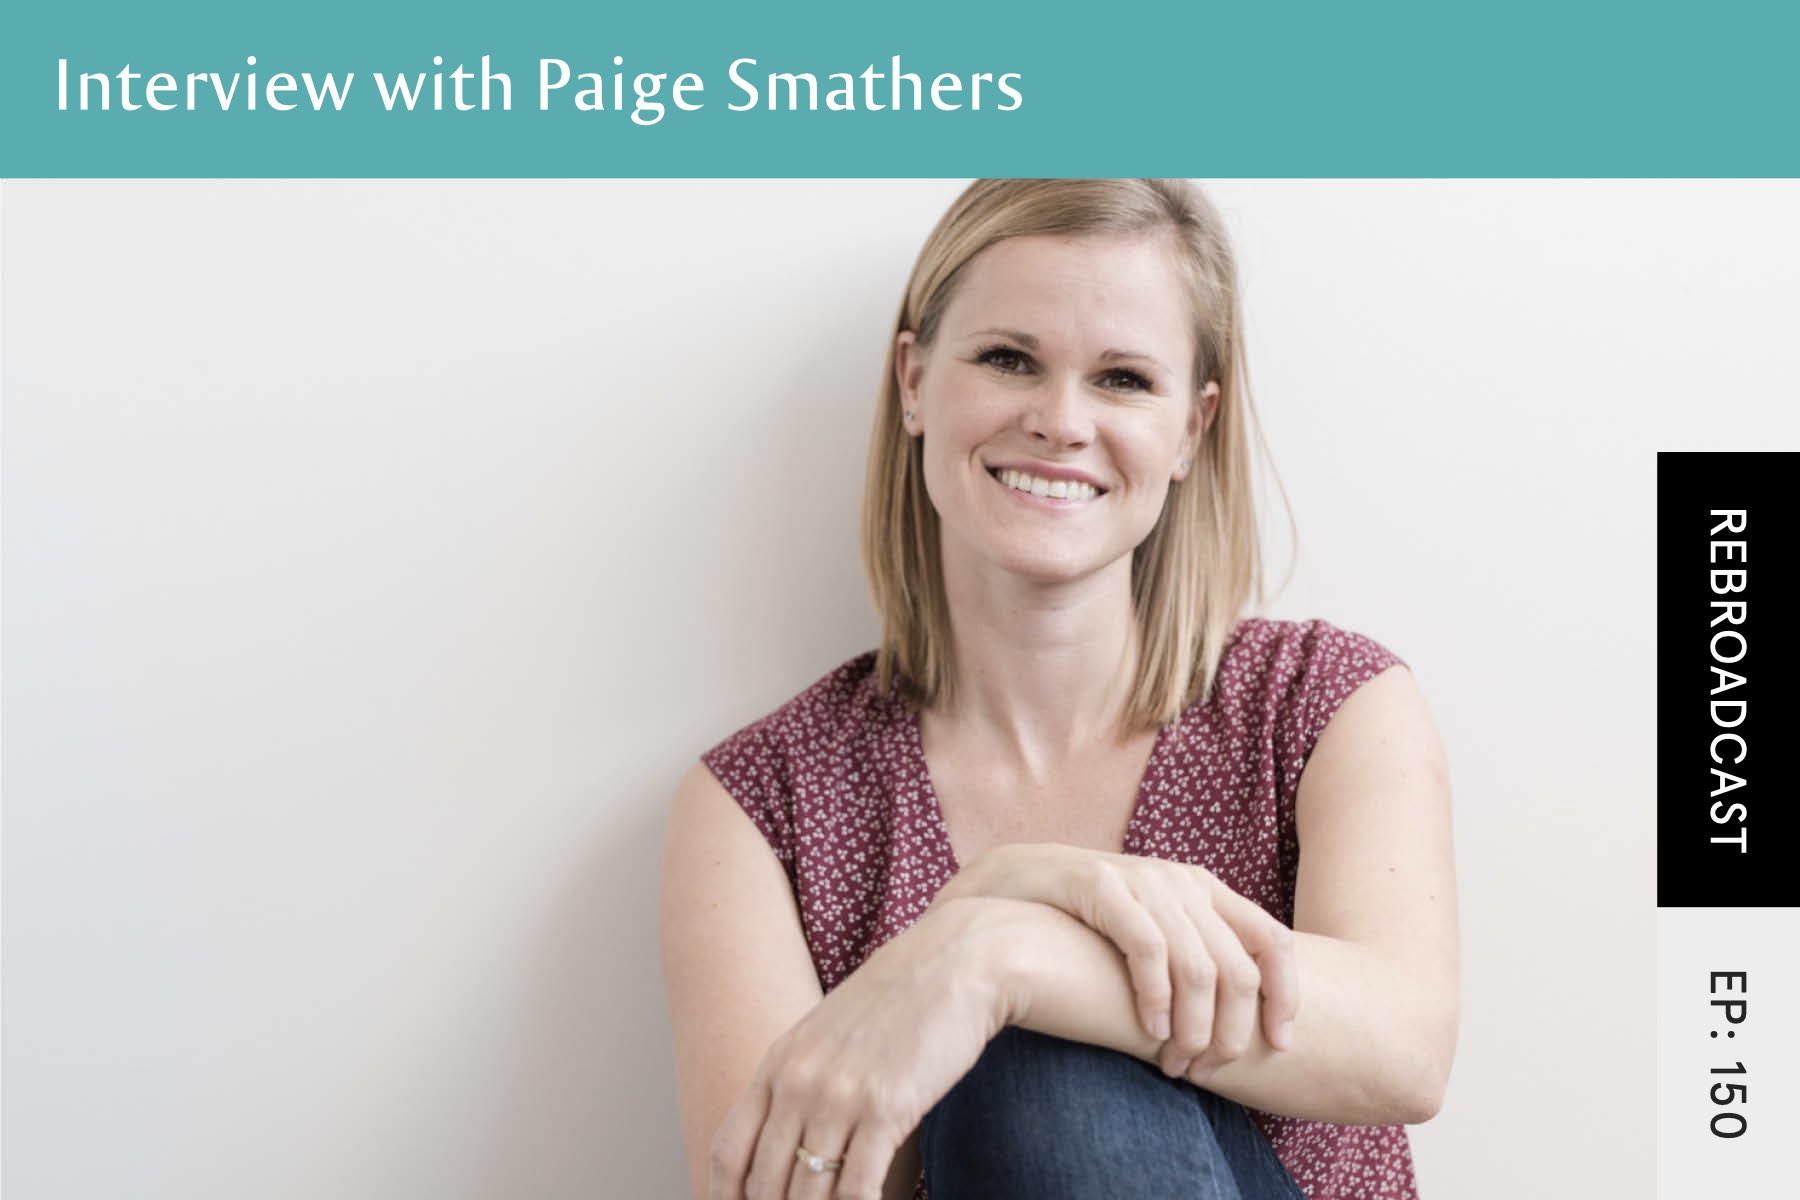 Rebroadcast: Interview with Paige Smathers - Seven Health: Eating Disorder Recovery and Anti Diet Nutritionist